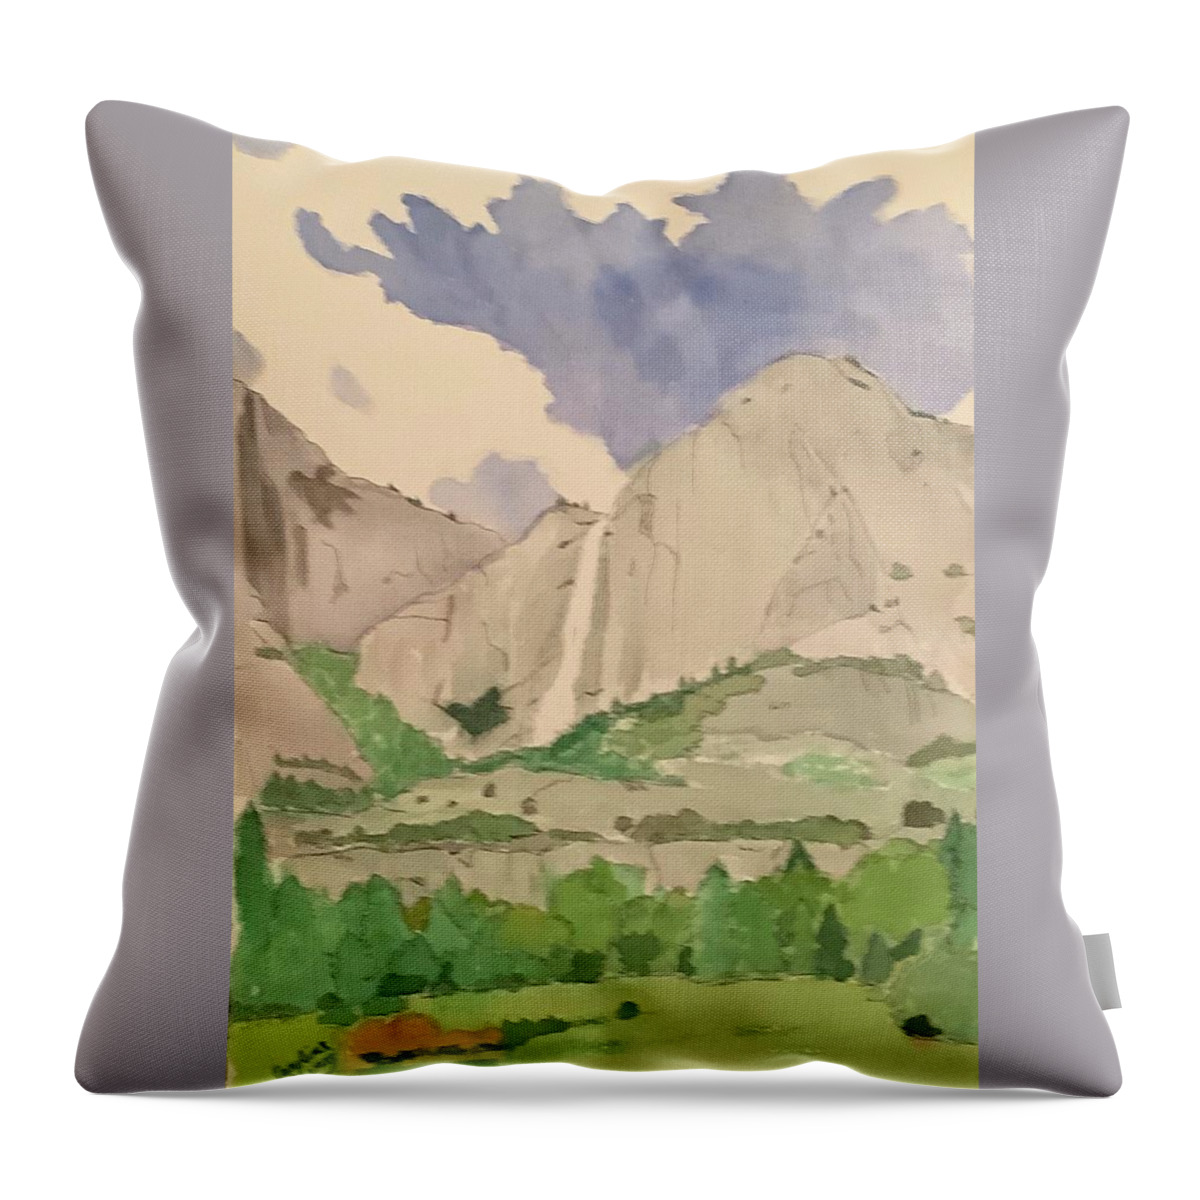 Waterfall Throw Pillow featuring the painting Yosemite Skies by Caroline Henry